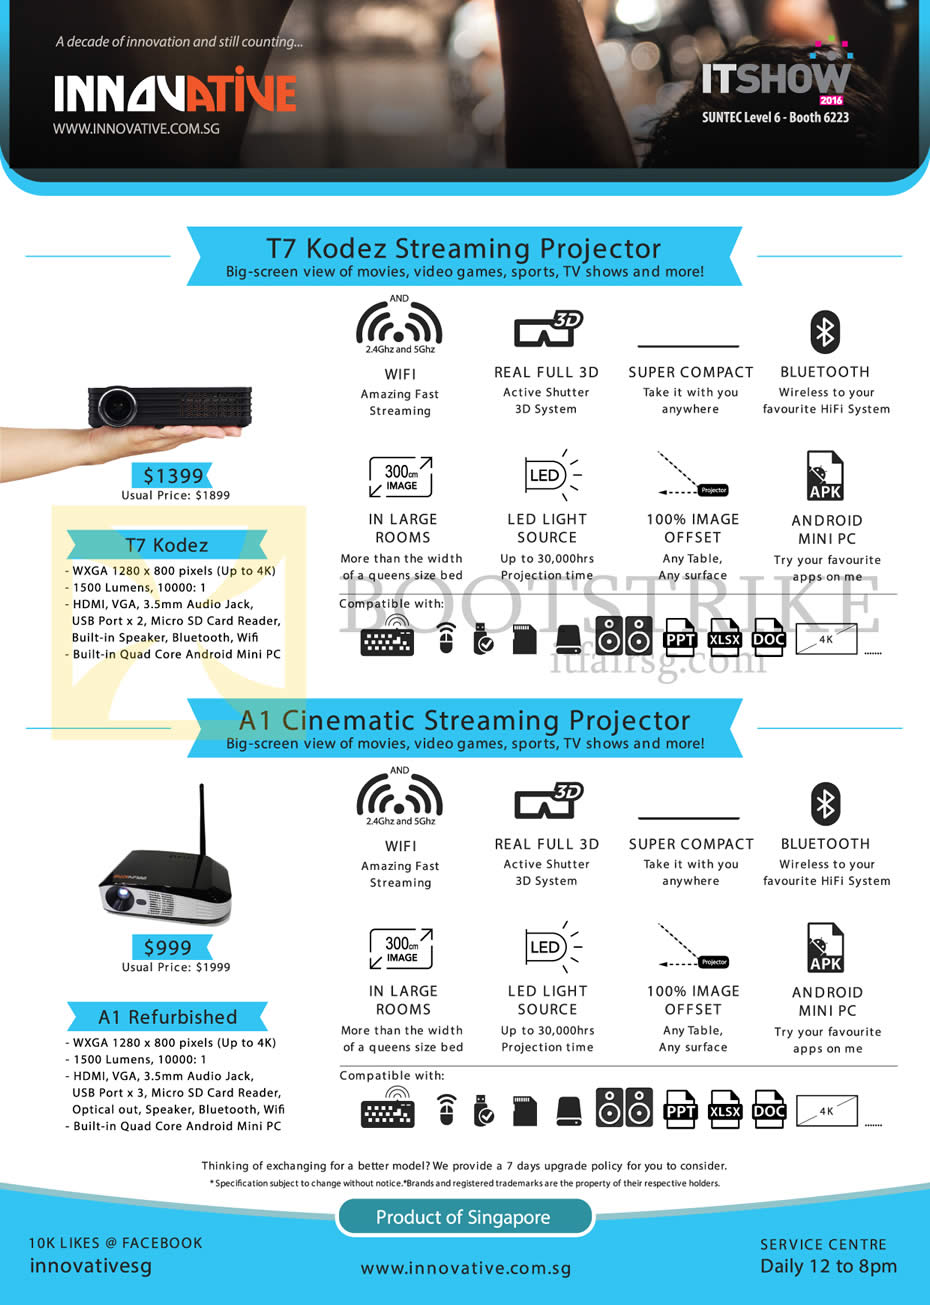 IT SHOW 2016 price list image brochure of Innovative Projectors Streaming T7 Kodez, A1 Refurbished